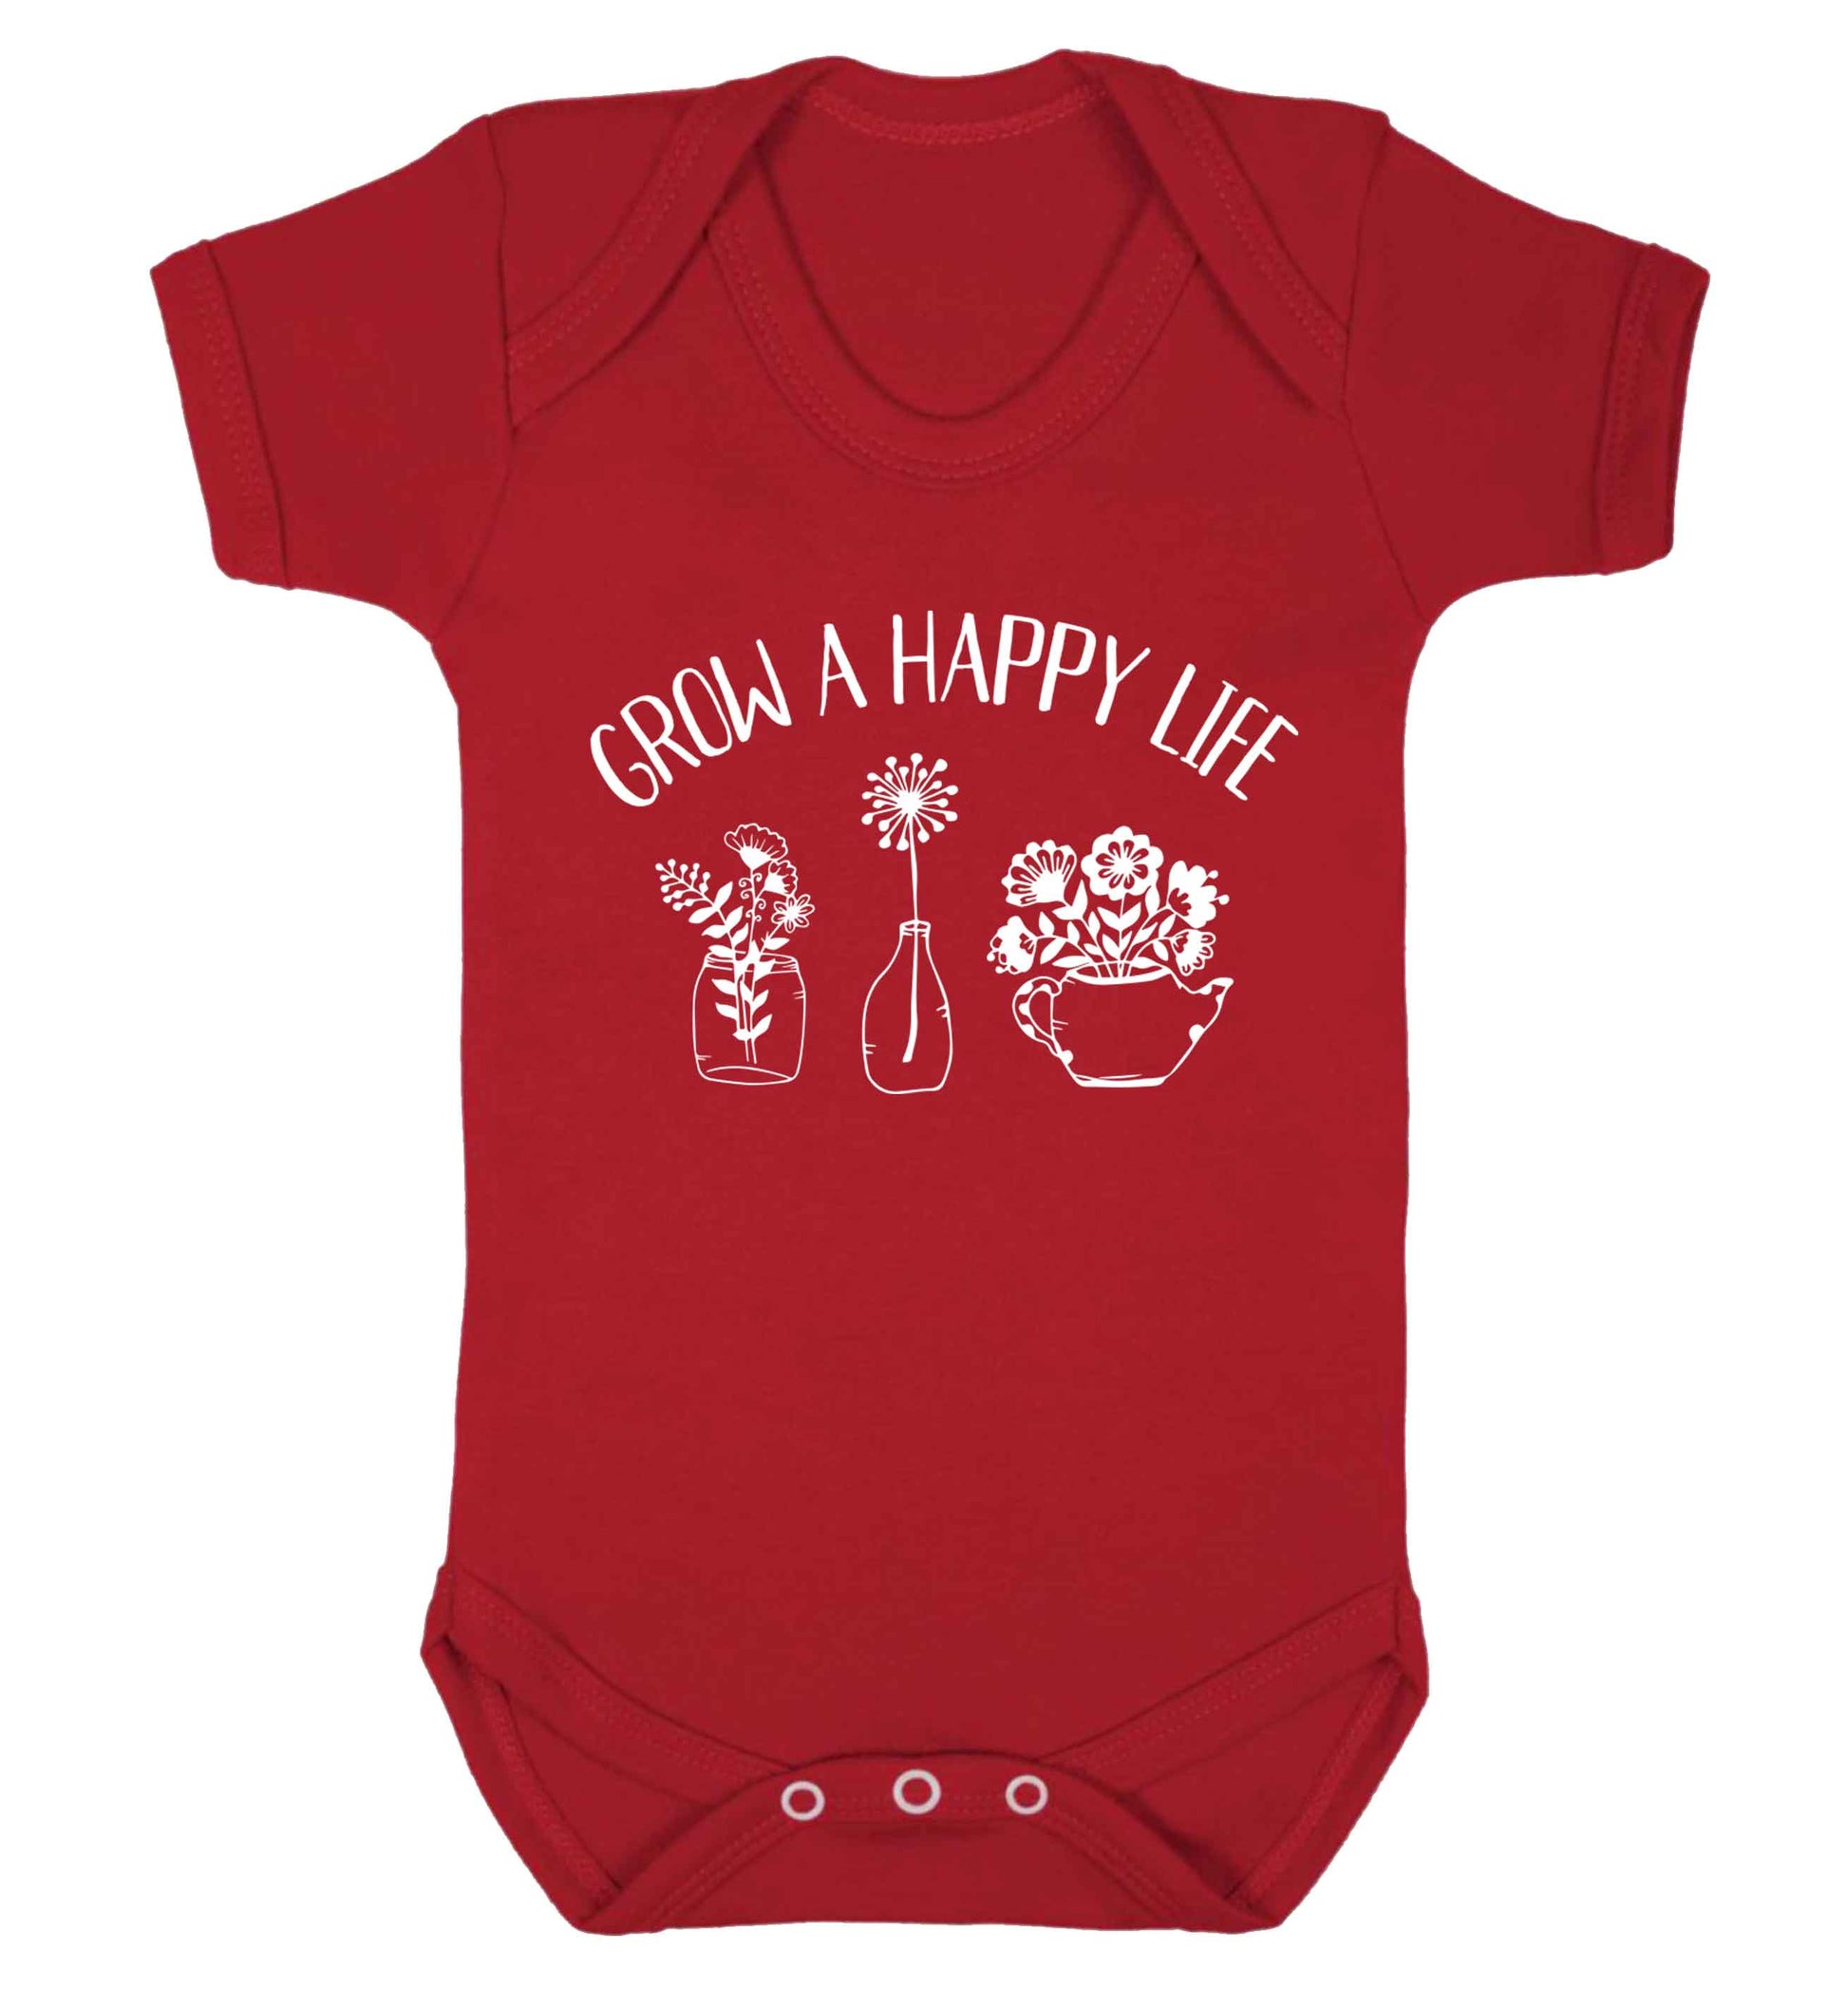 Grow a happy life Baby Vest red 18-24 months